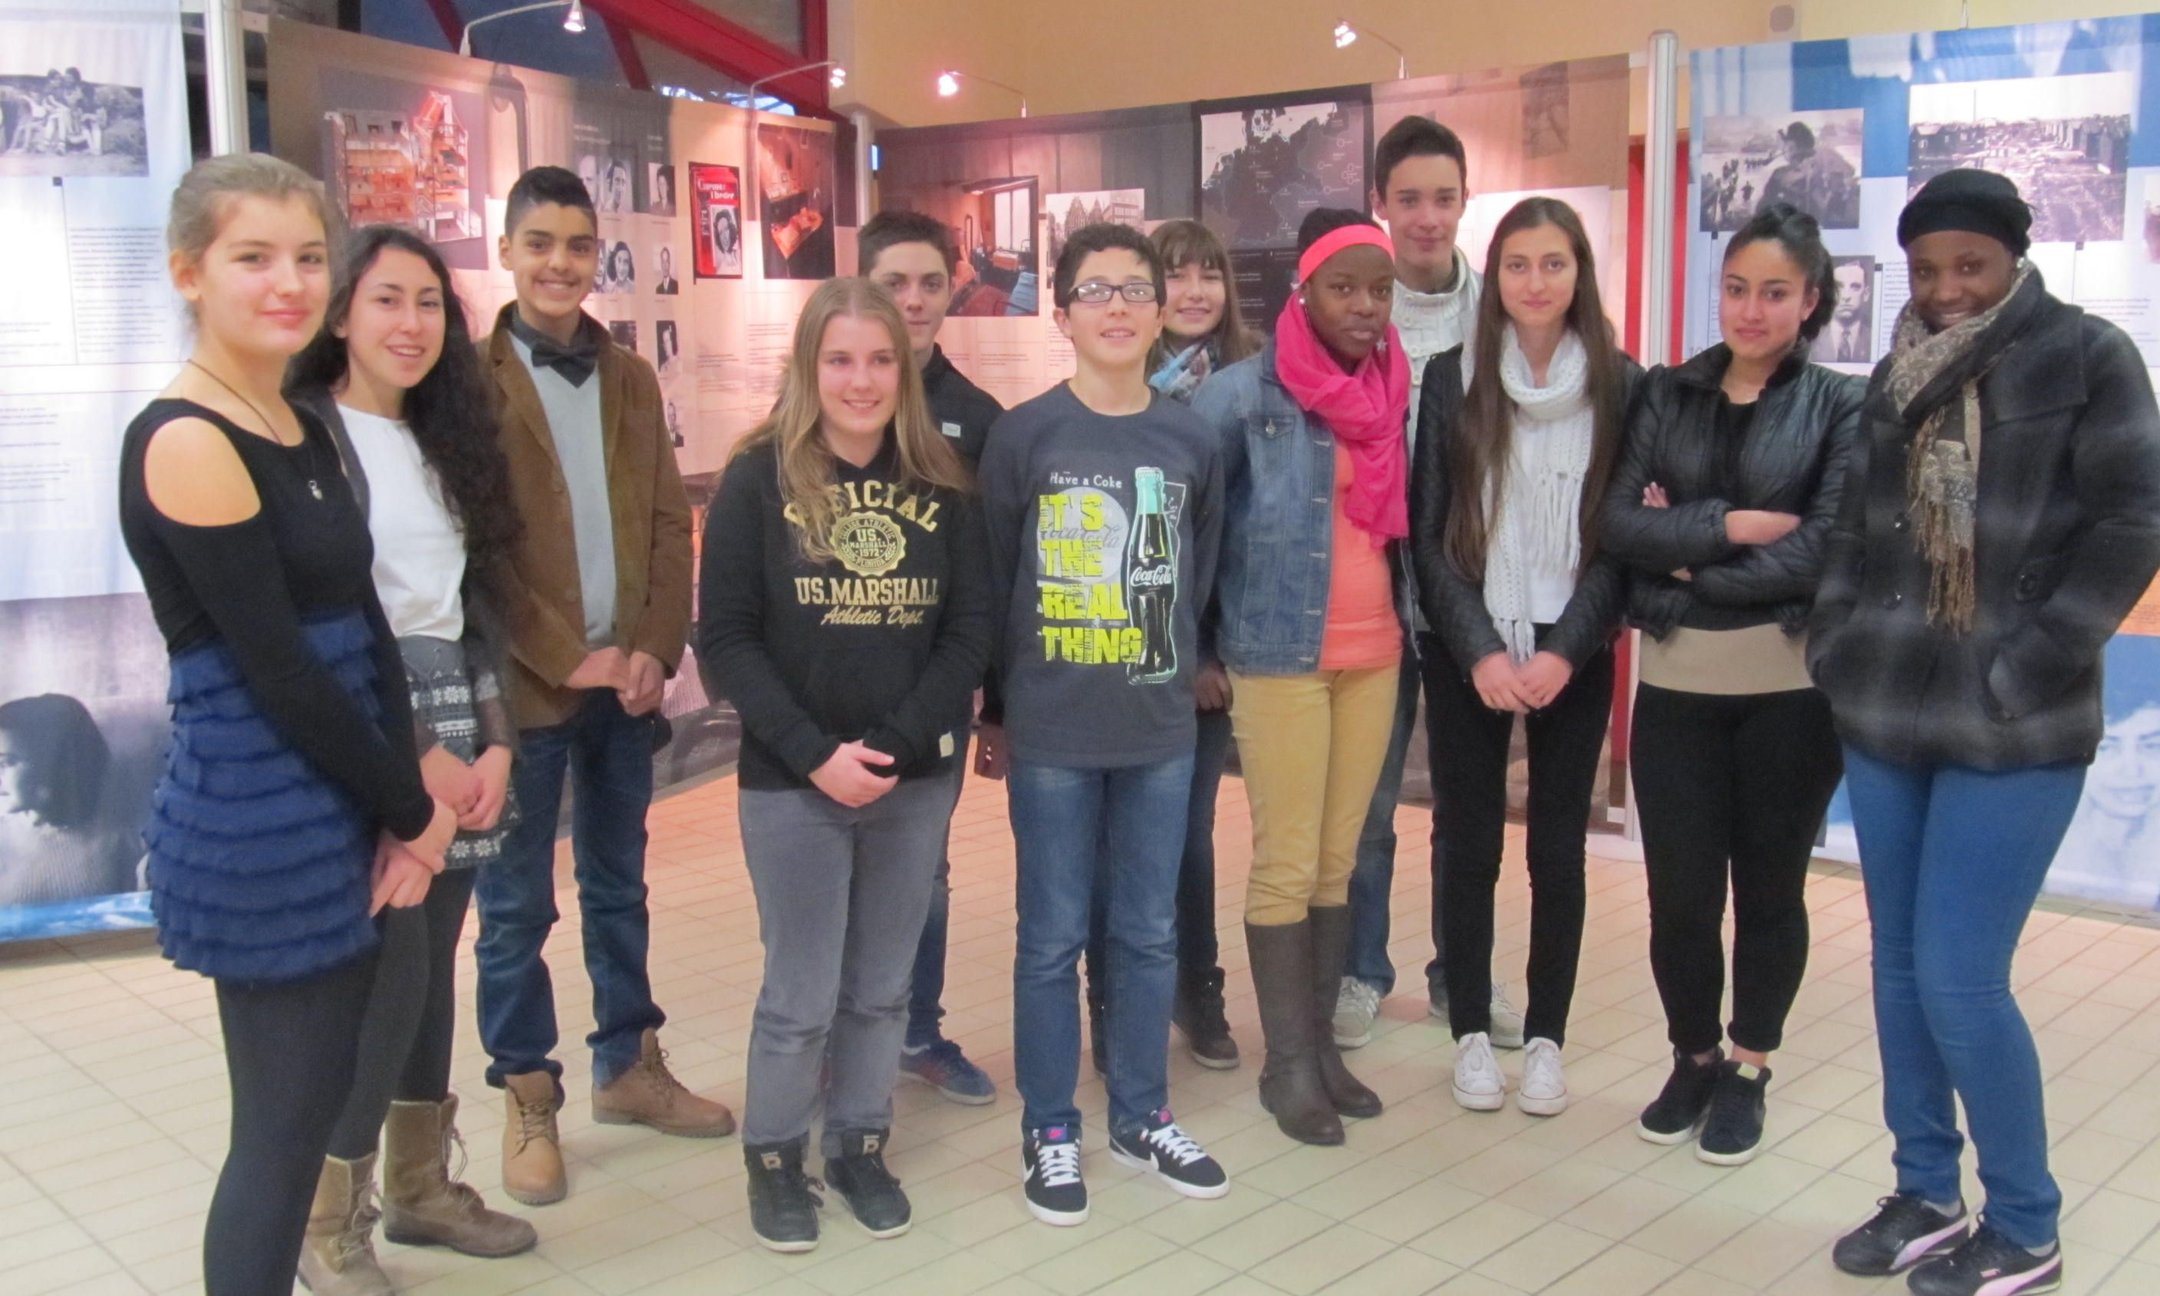 Peer guides at the Anne Frank – A History for Today exhibition in Montluçon (January 2015)